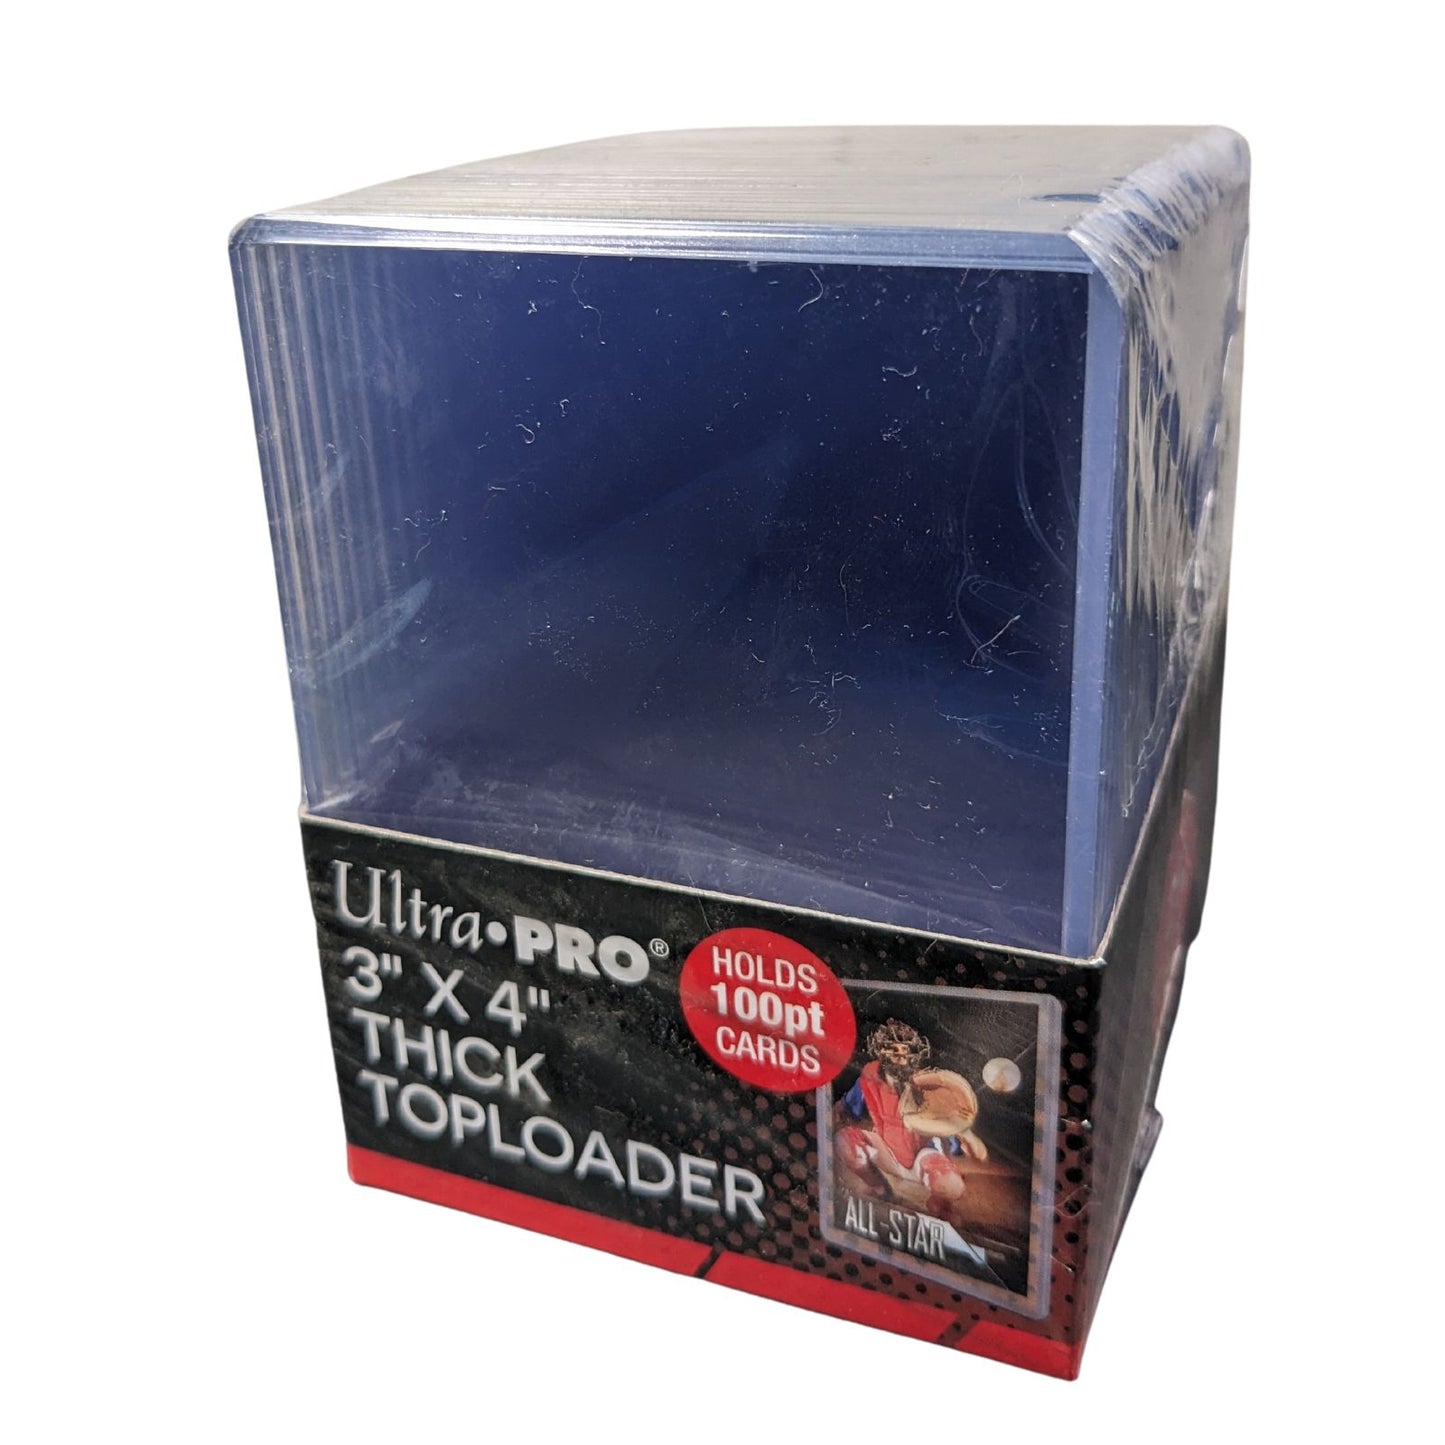 100pt Ultra Pro Toploaders Thick 3x4 Inch 25 Pack